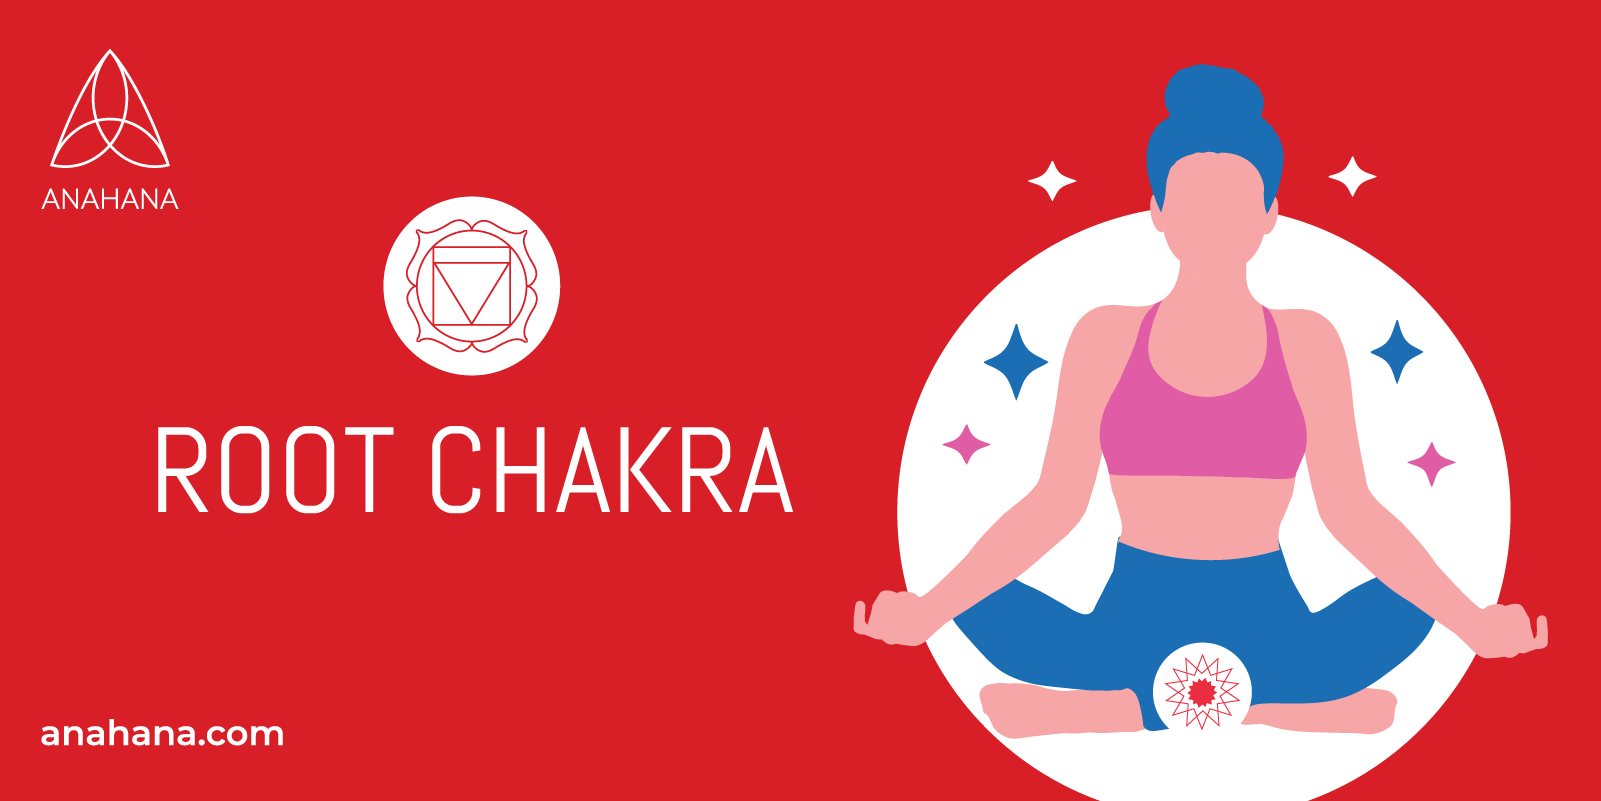 Chakras: A Beginner's Guide to the 7 Chakras